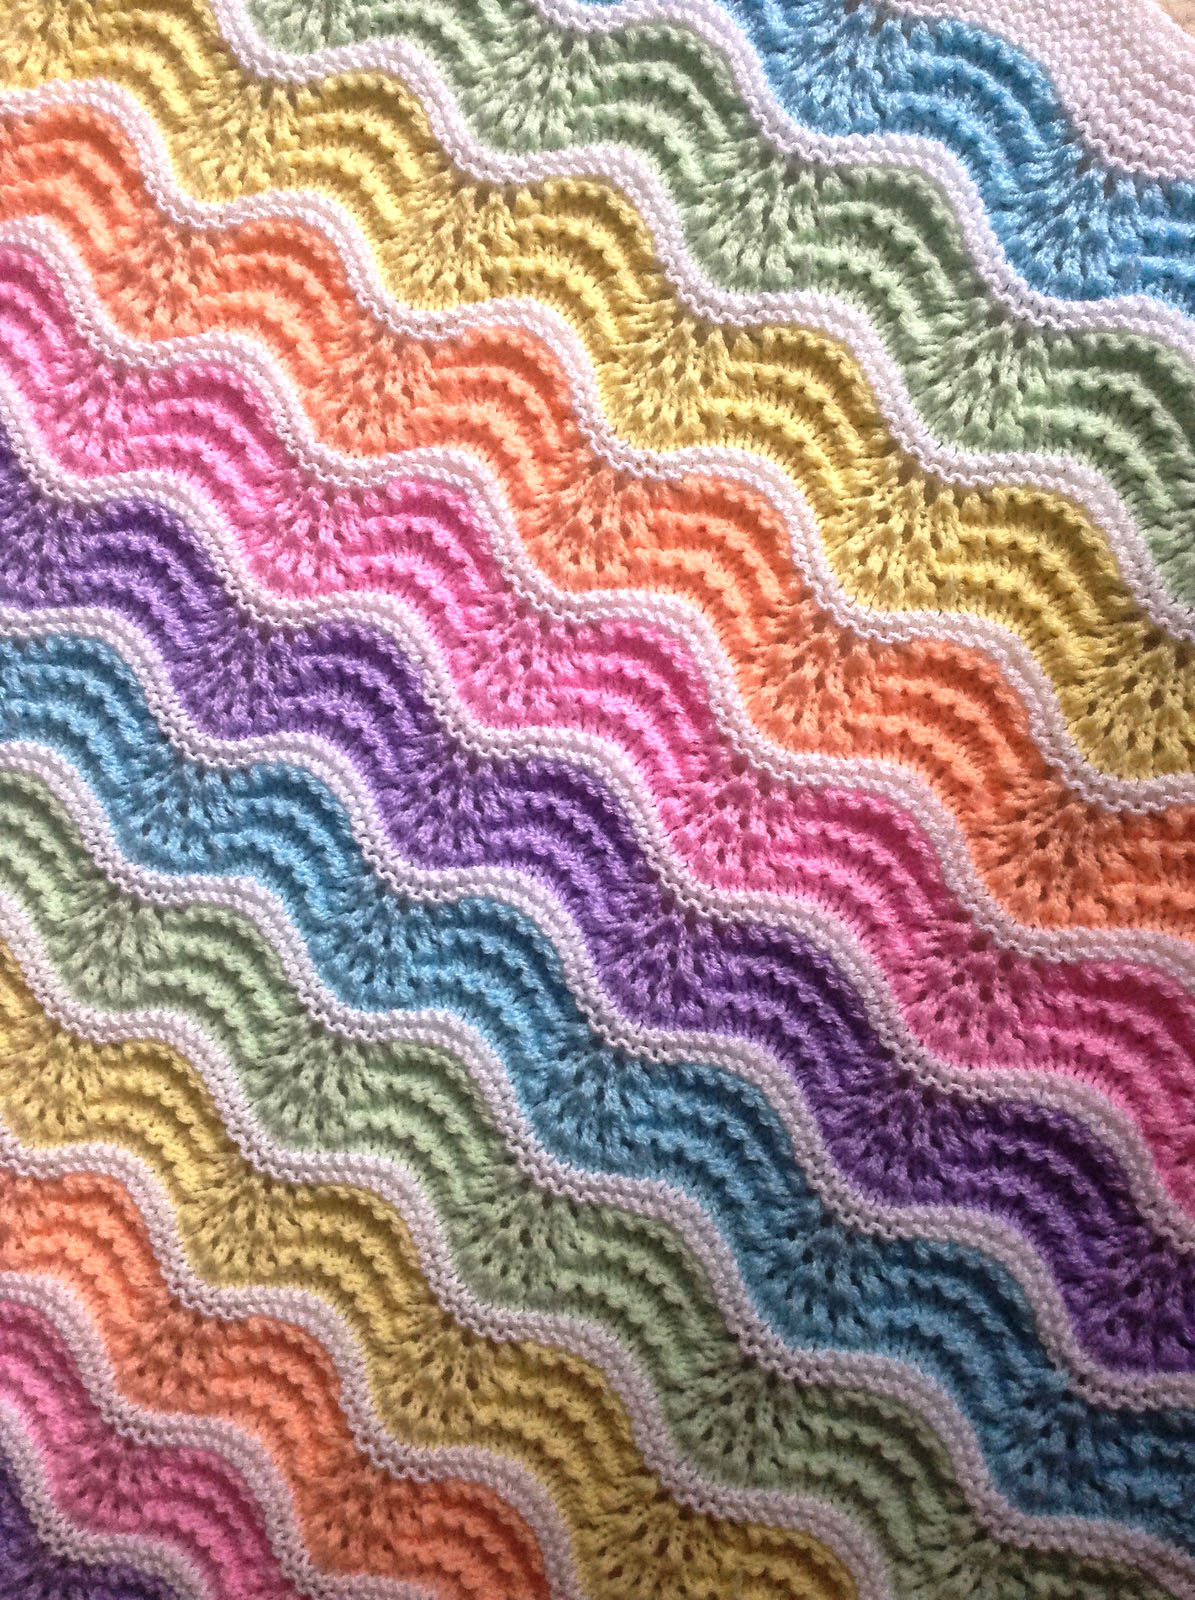 best wool crochet baby for blanket Loop Knitting Rainbow the Patterns In Knitting